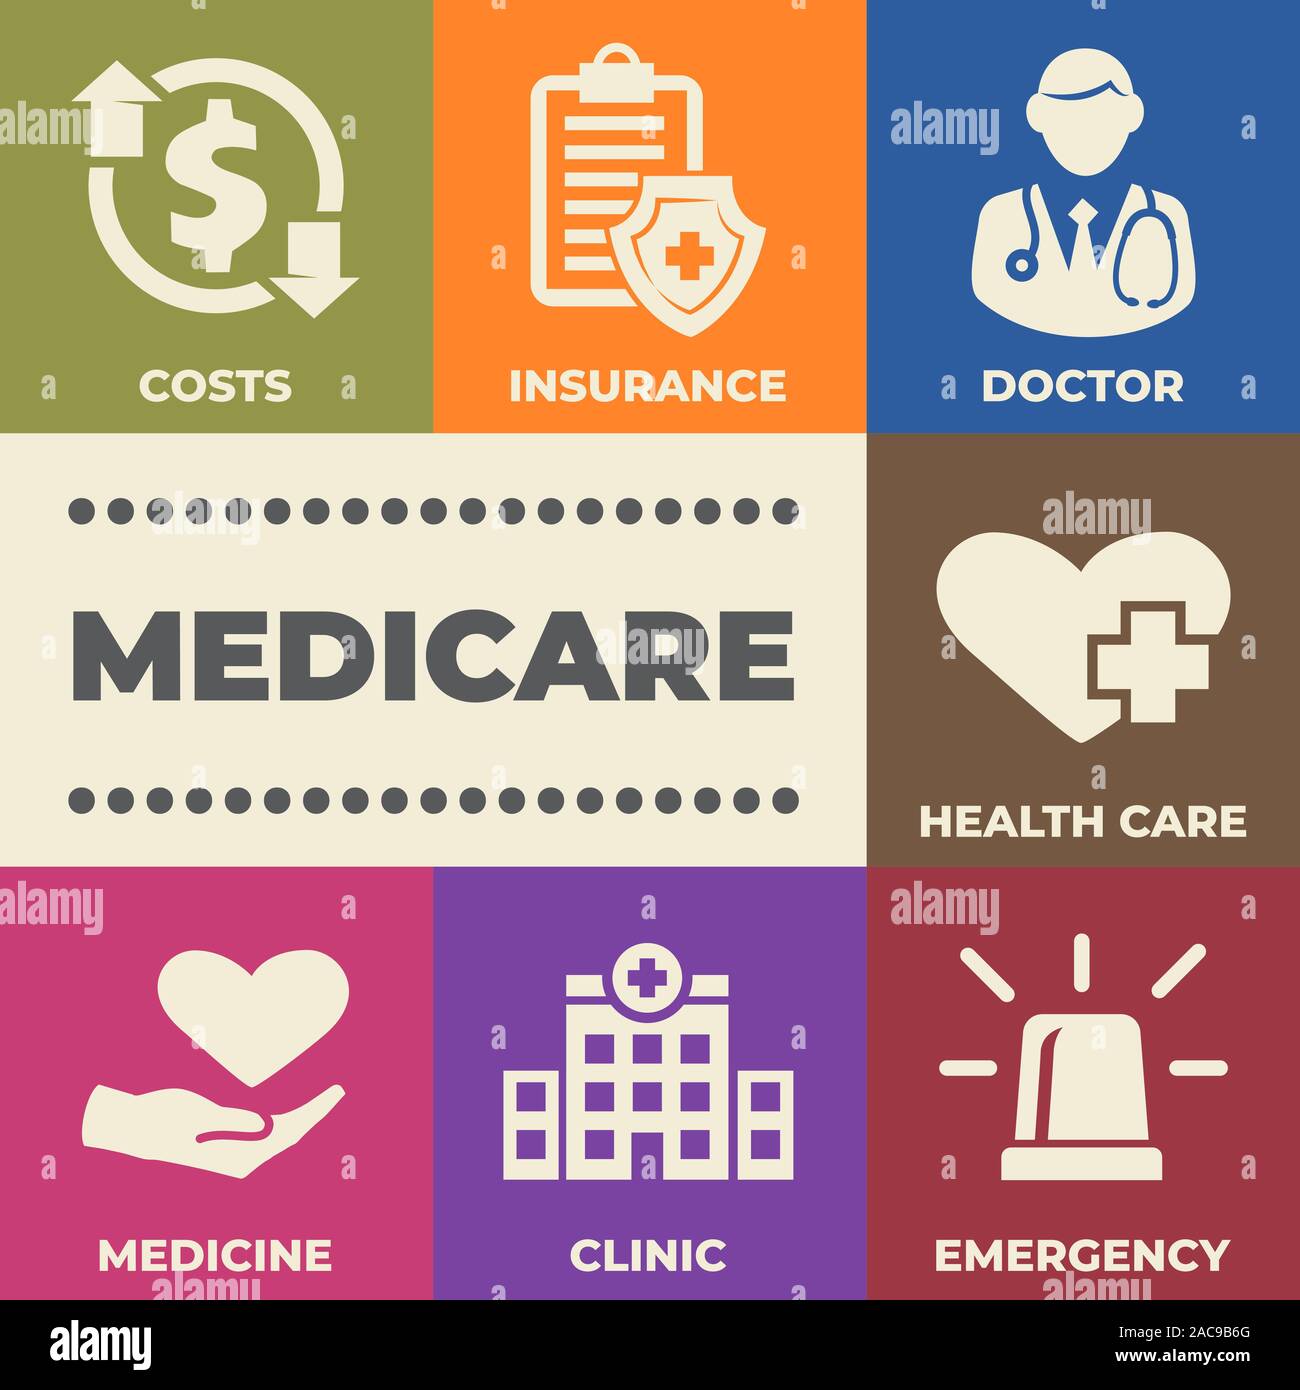 MEDICARE Concept with icons and signs Stock Vector